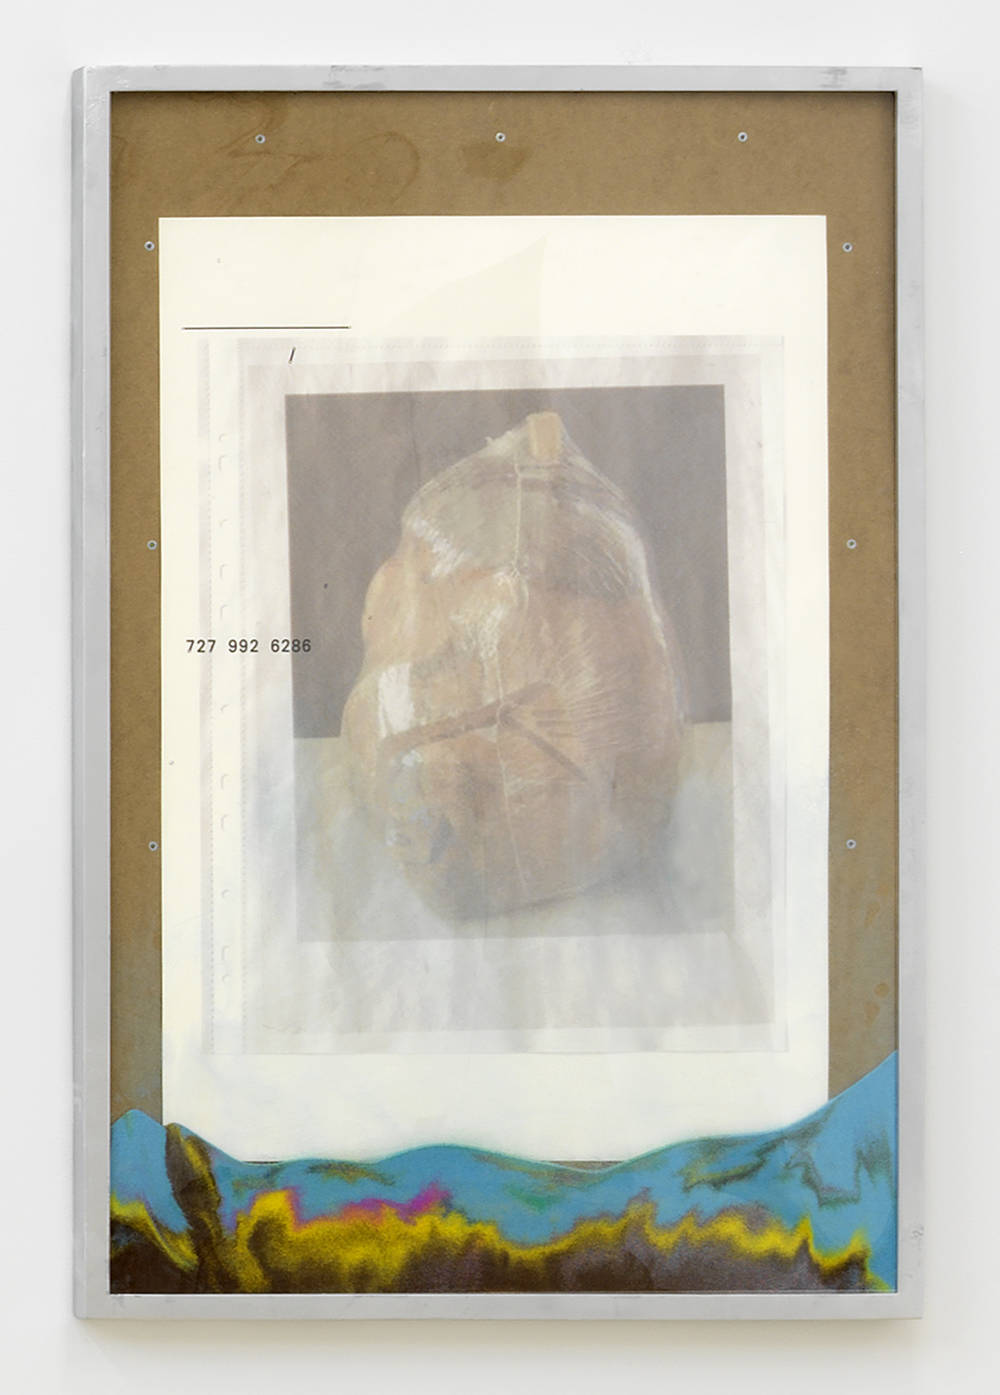 In a silver frame, an abstract poster image with a brown border. At the bottom of the frame behind glass is a pile of differently colored sand. 